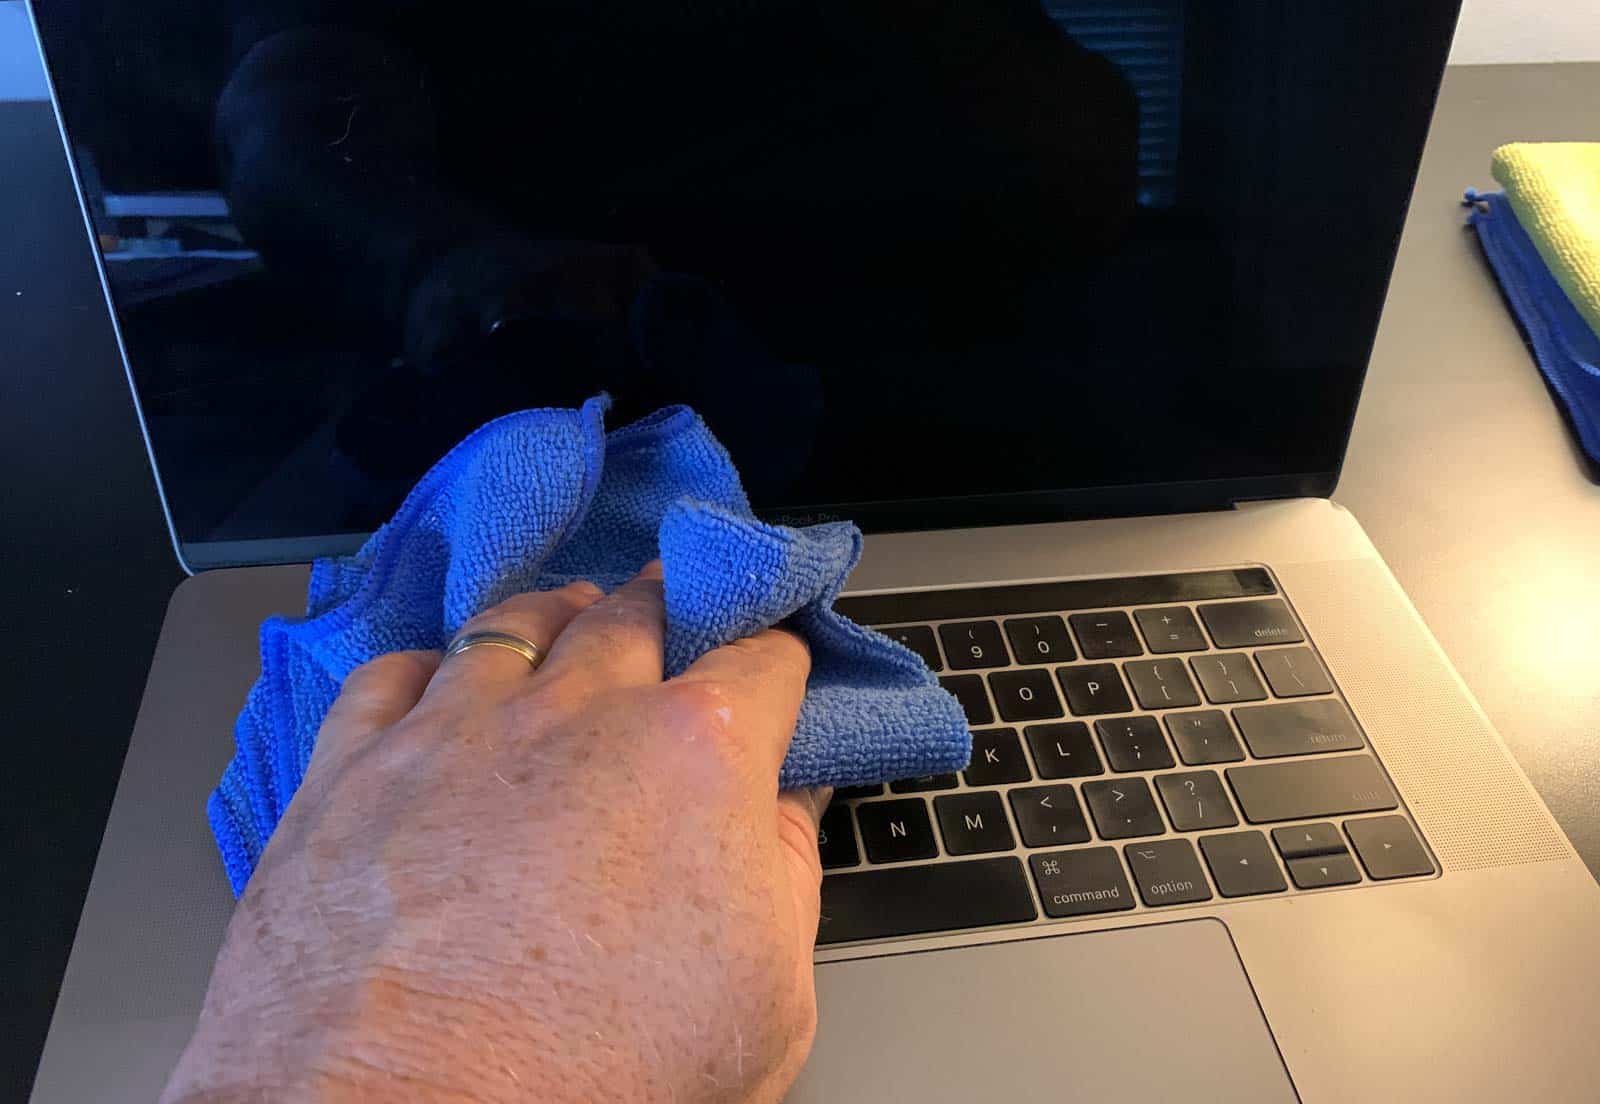 Use disinfectant wipes to clean the keyboard surface